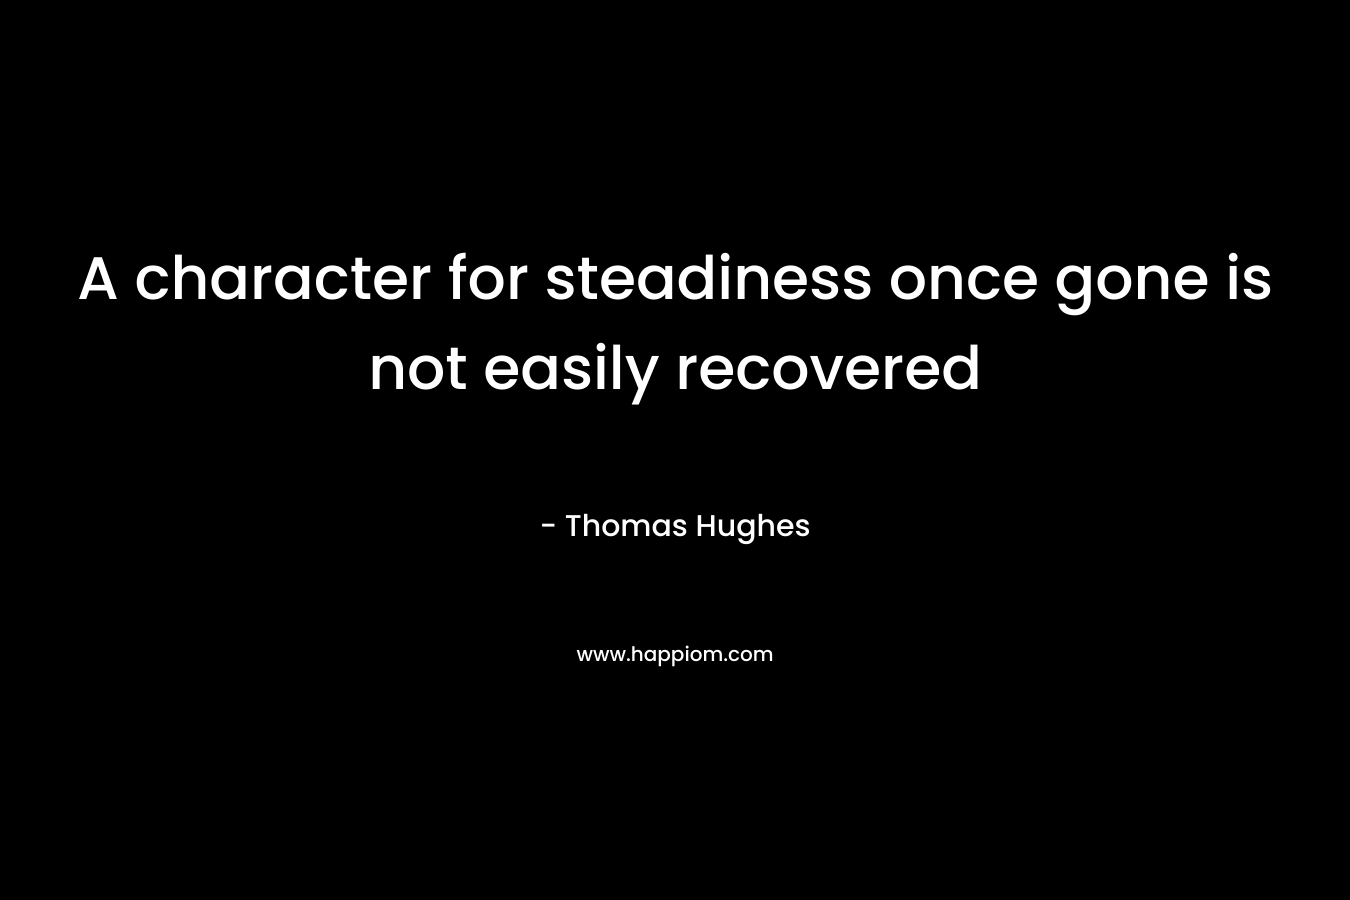 A character for steadiness once gone is not easily recovered – Thomas Hughes